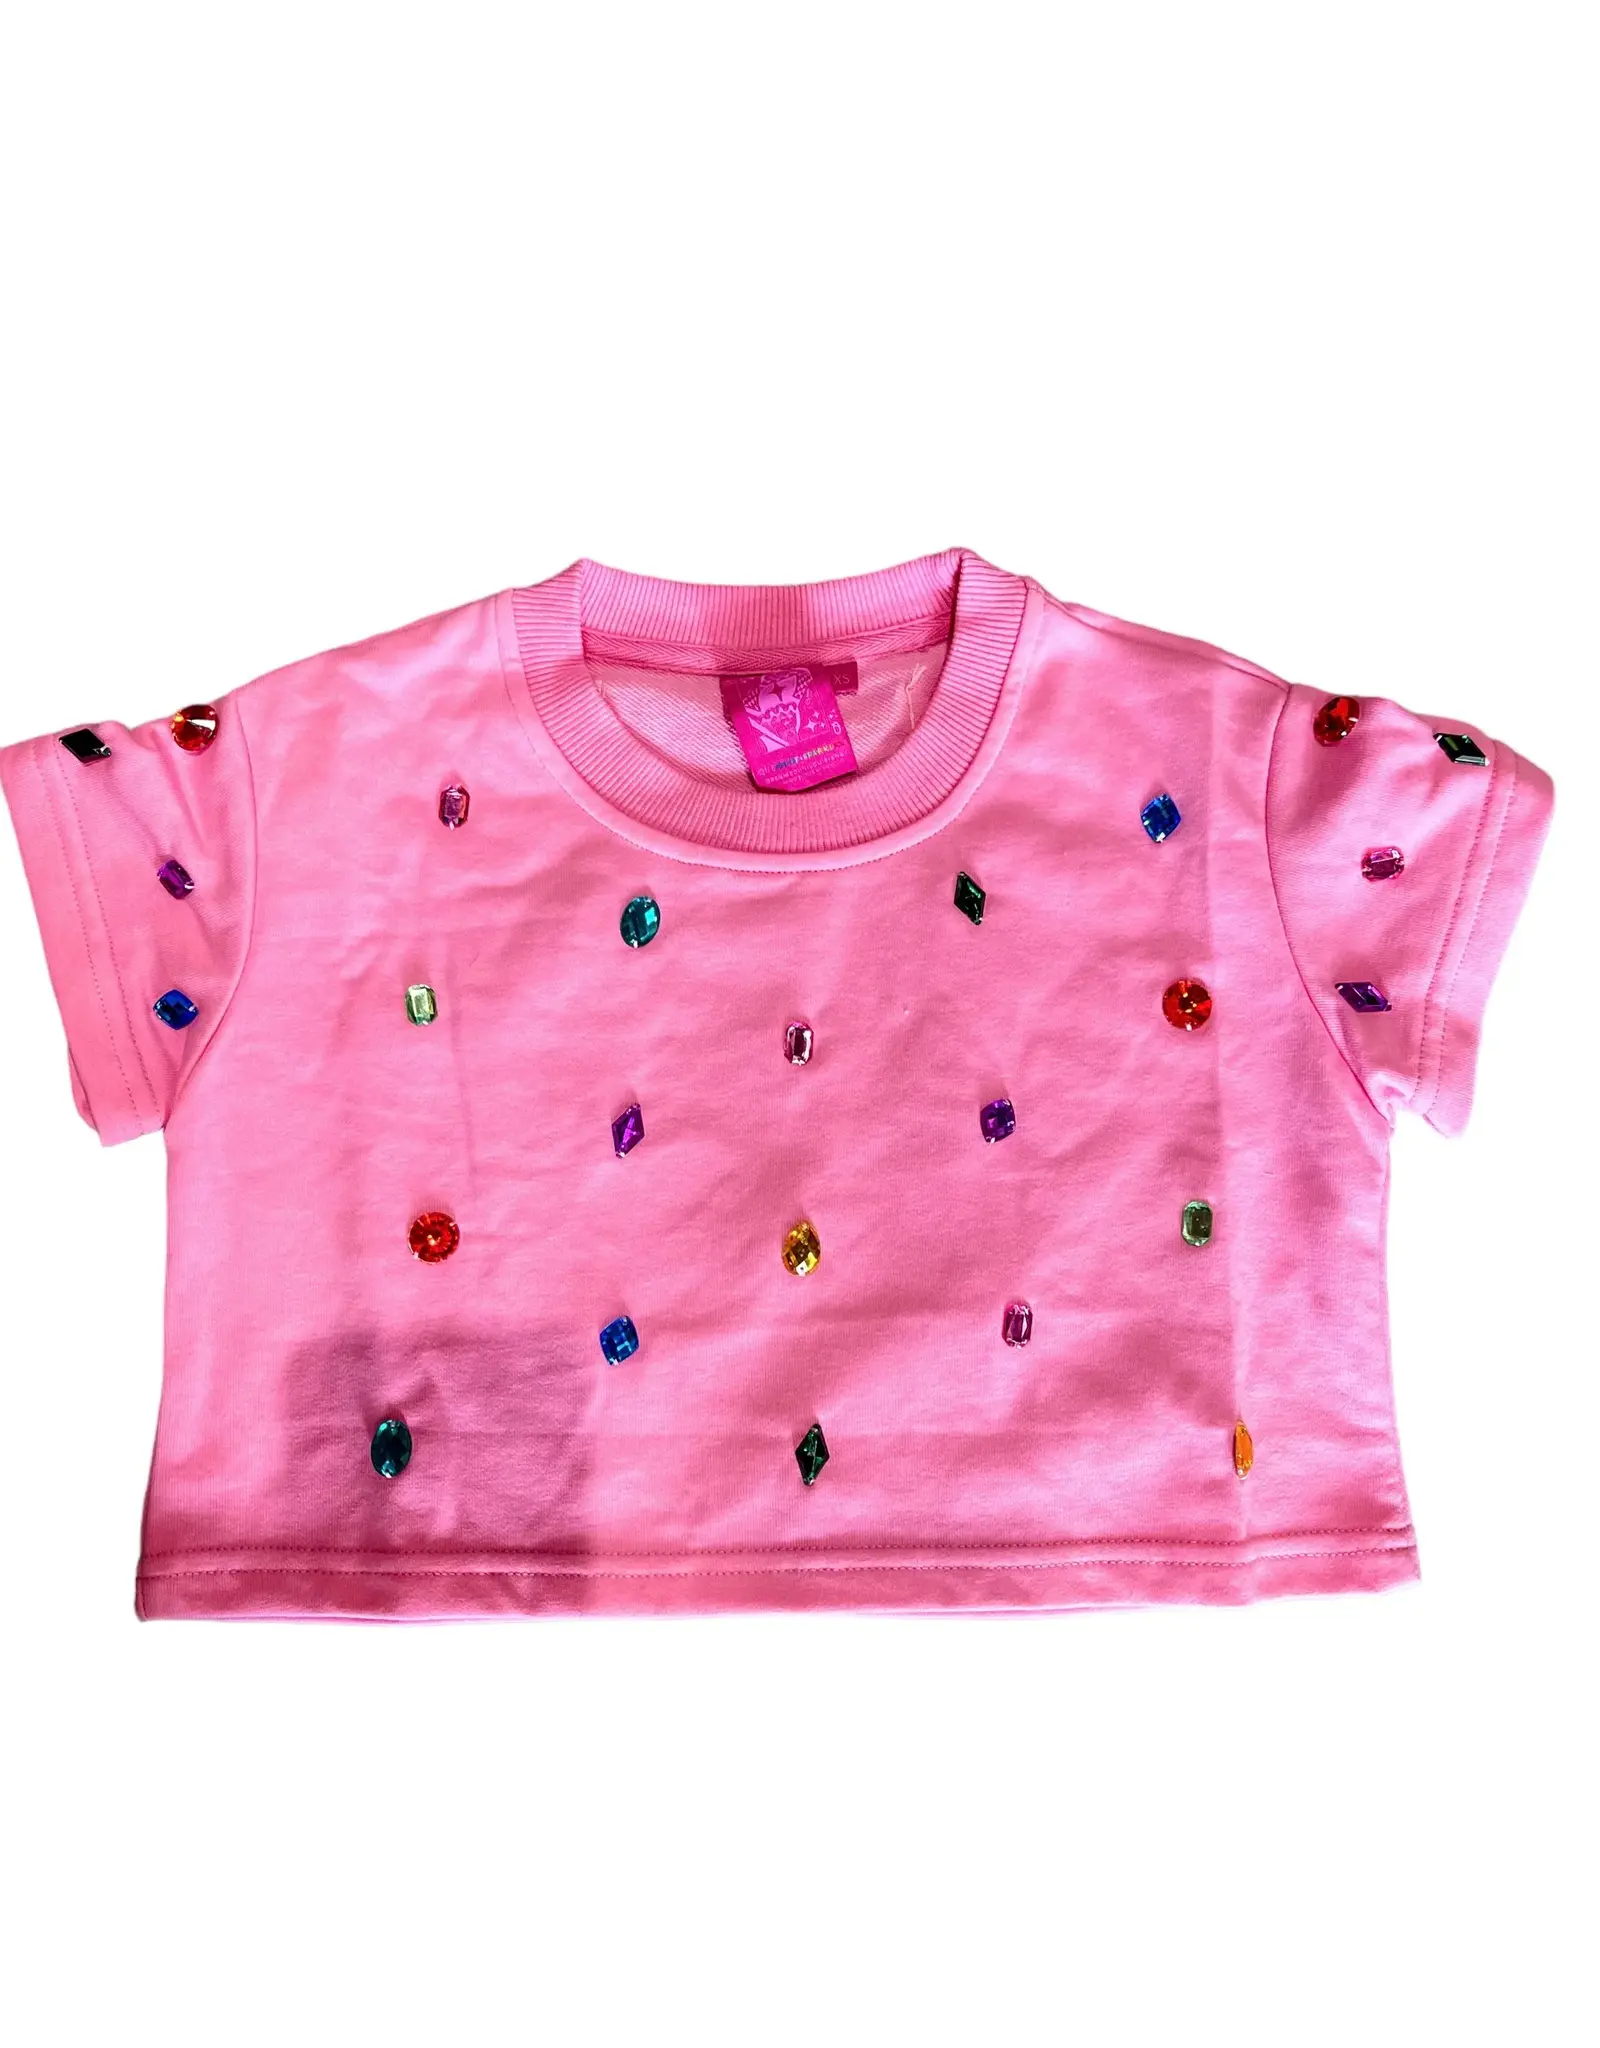 Queen of Sparkles Kids Pink Scattered Rhinestone Top